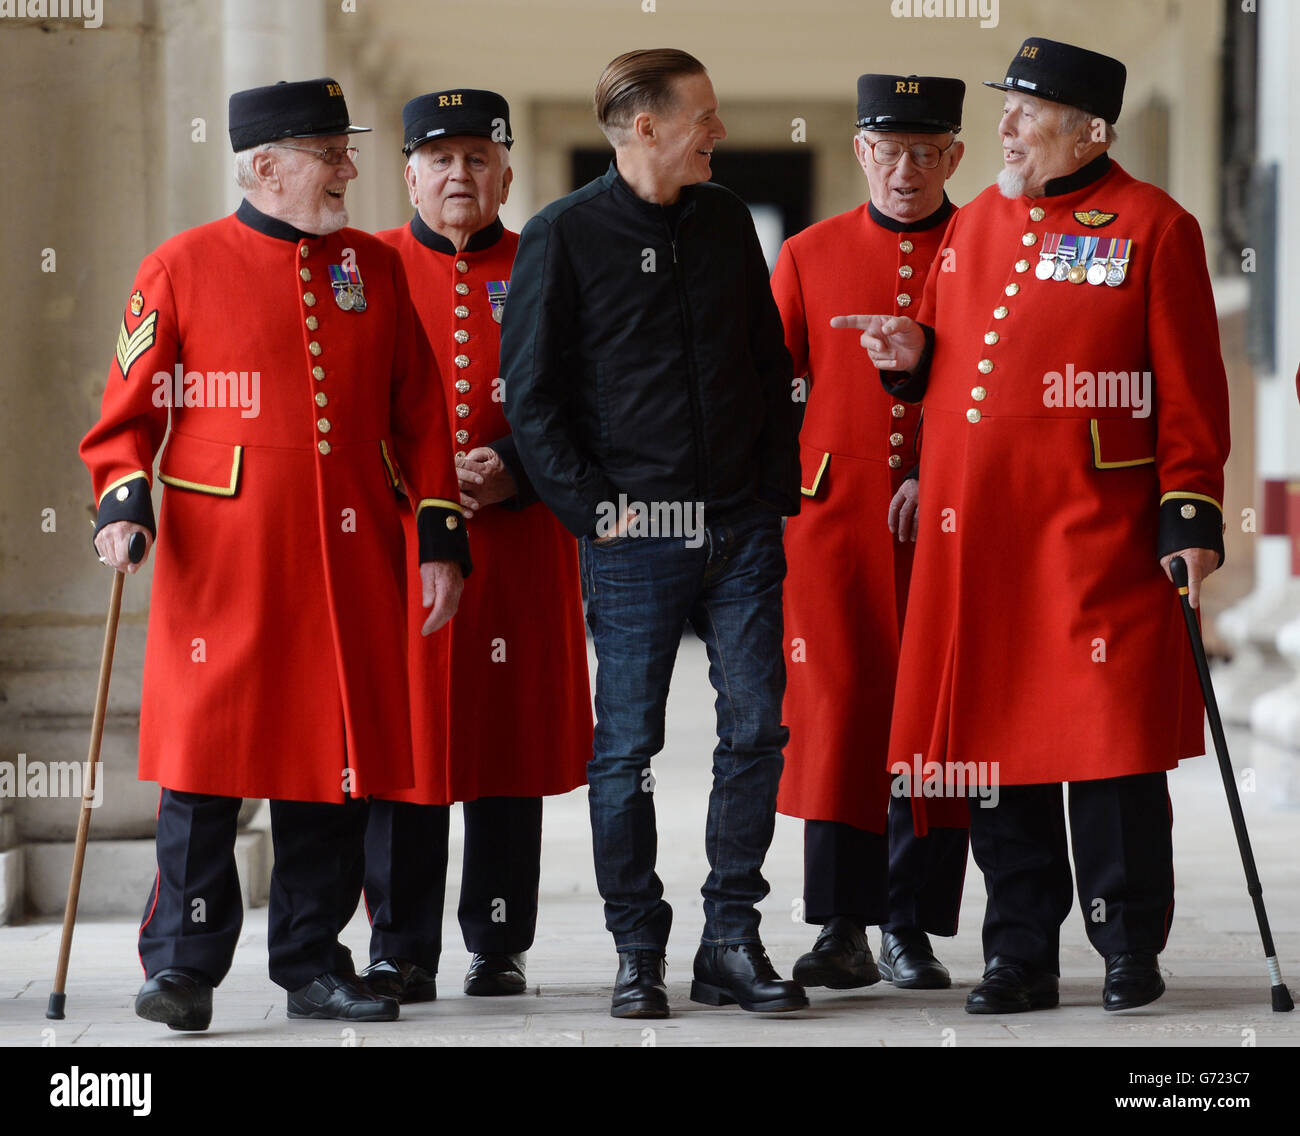 Singer and photographer Bryan Adams meets Chelsea Pensioners at the Royal Chelsea Hospital in London, where he unveiled a berth named in honour of the Bryan Adams Foundation, which has supported the hospital's extensive refurbishment. Stock Photo